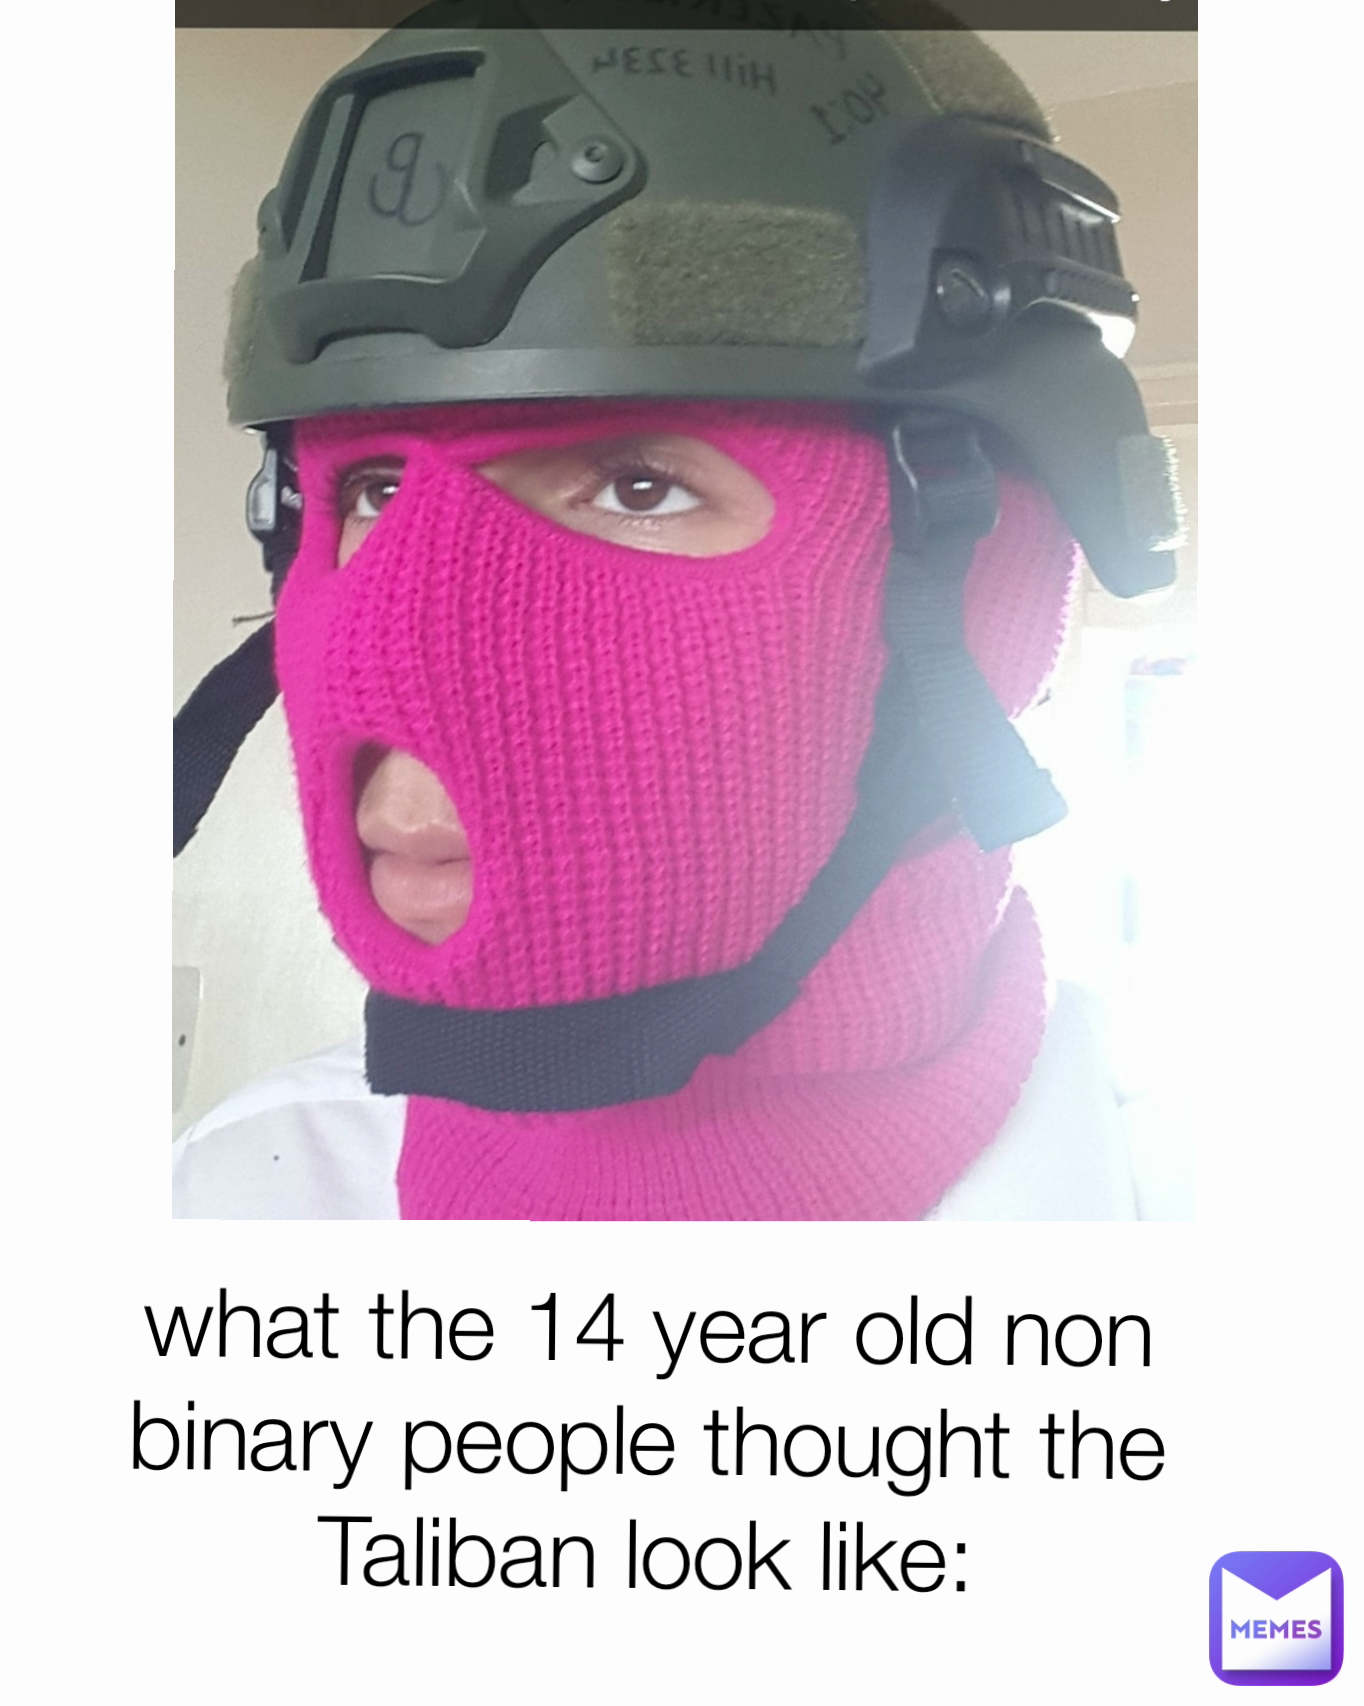 what the 14 year old non binary people thought the Taliban look like: